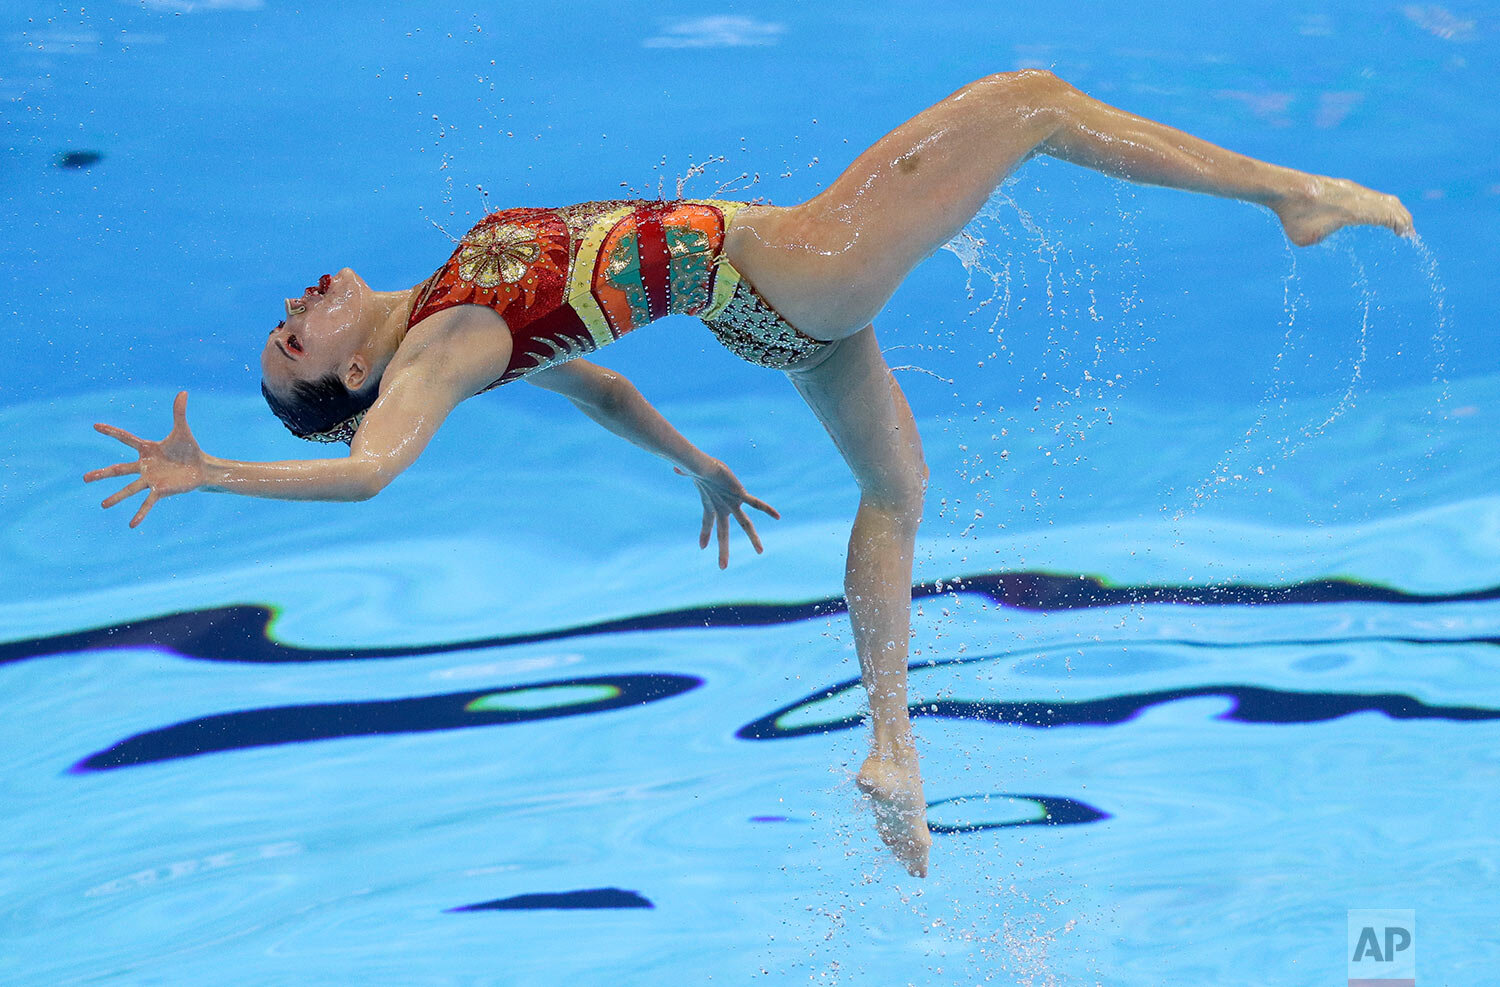  A swimmer from China performs during the artistic swimming team free preliminary event at the World Swimming Championships in Gwangju, South Korea, on July 17, 2019. (AP Photo/Mark Baker) 